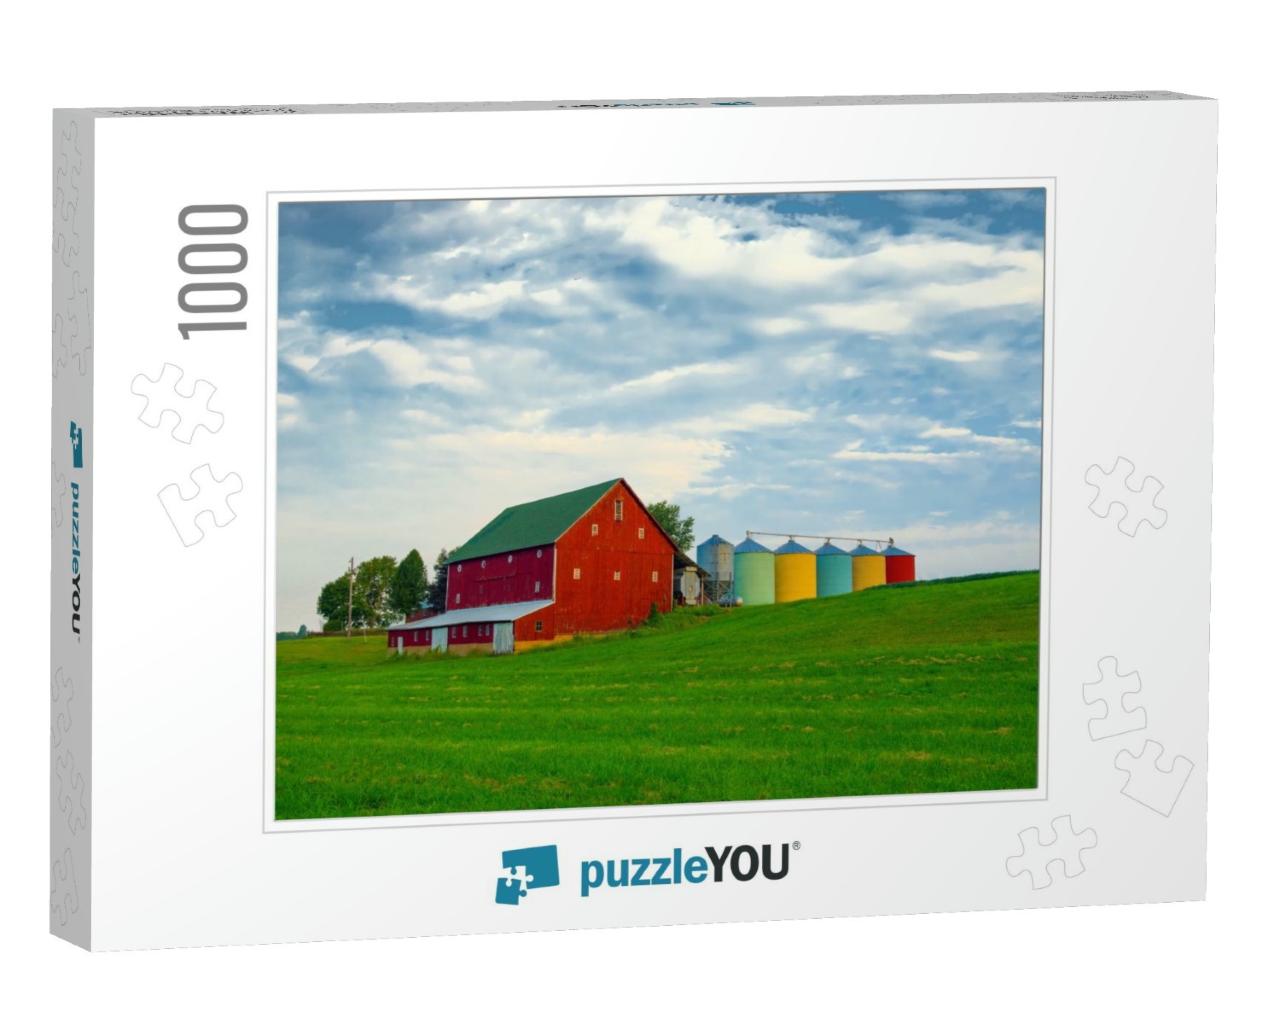 Red Barn on a Family Farm-Miami County Indiana... Jigsaw Puzzle with 1000 pieces